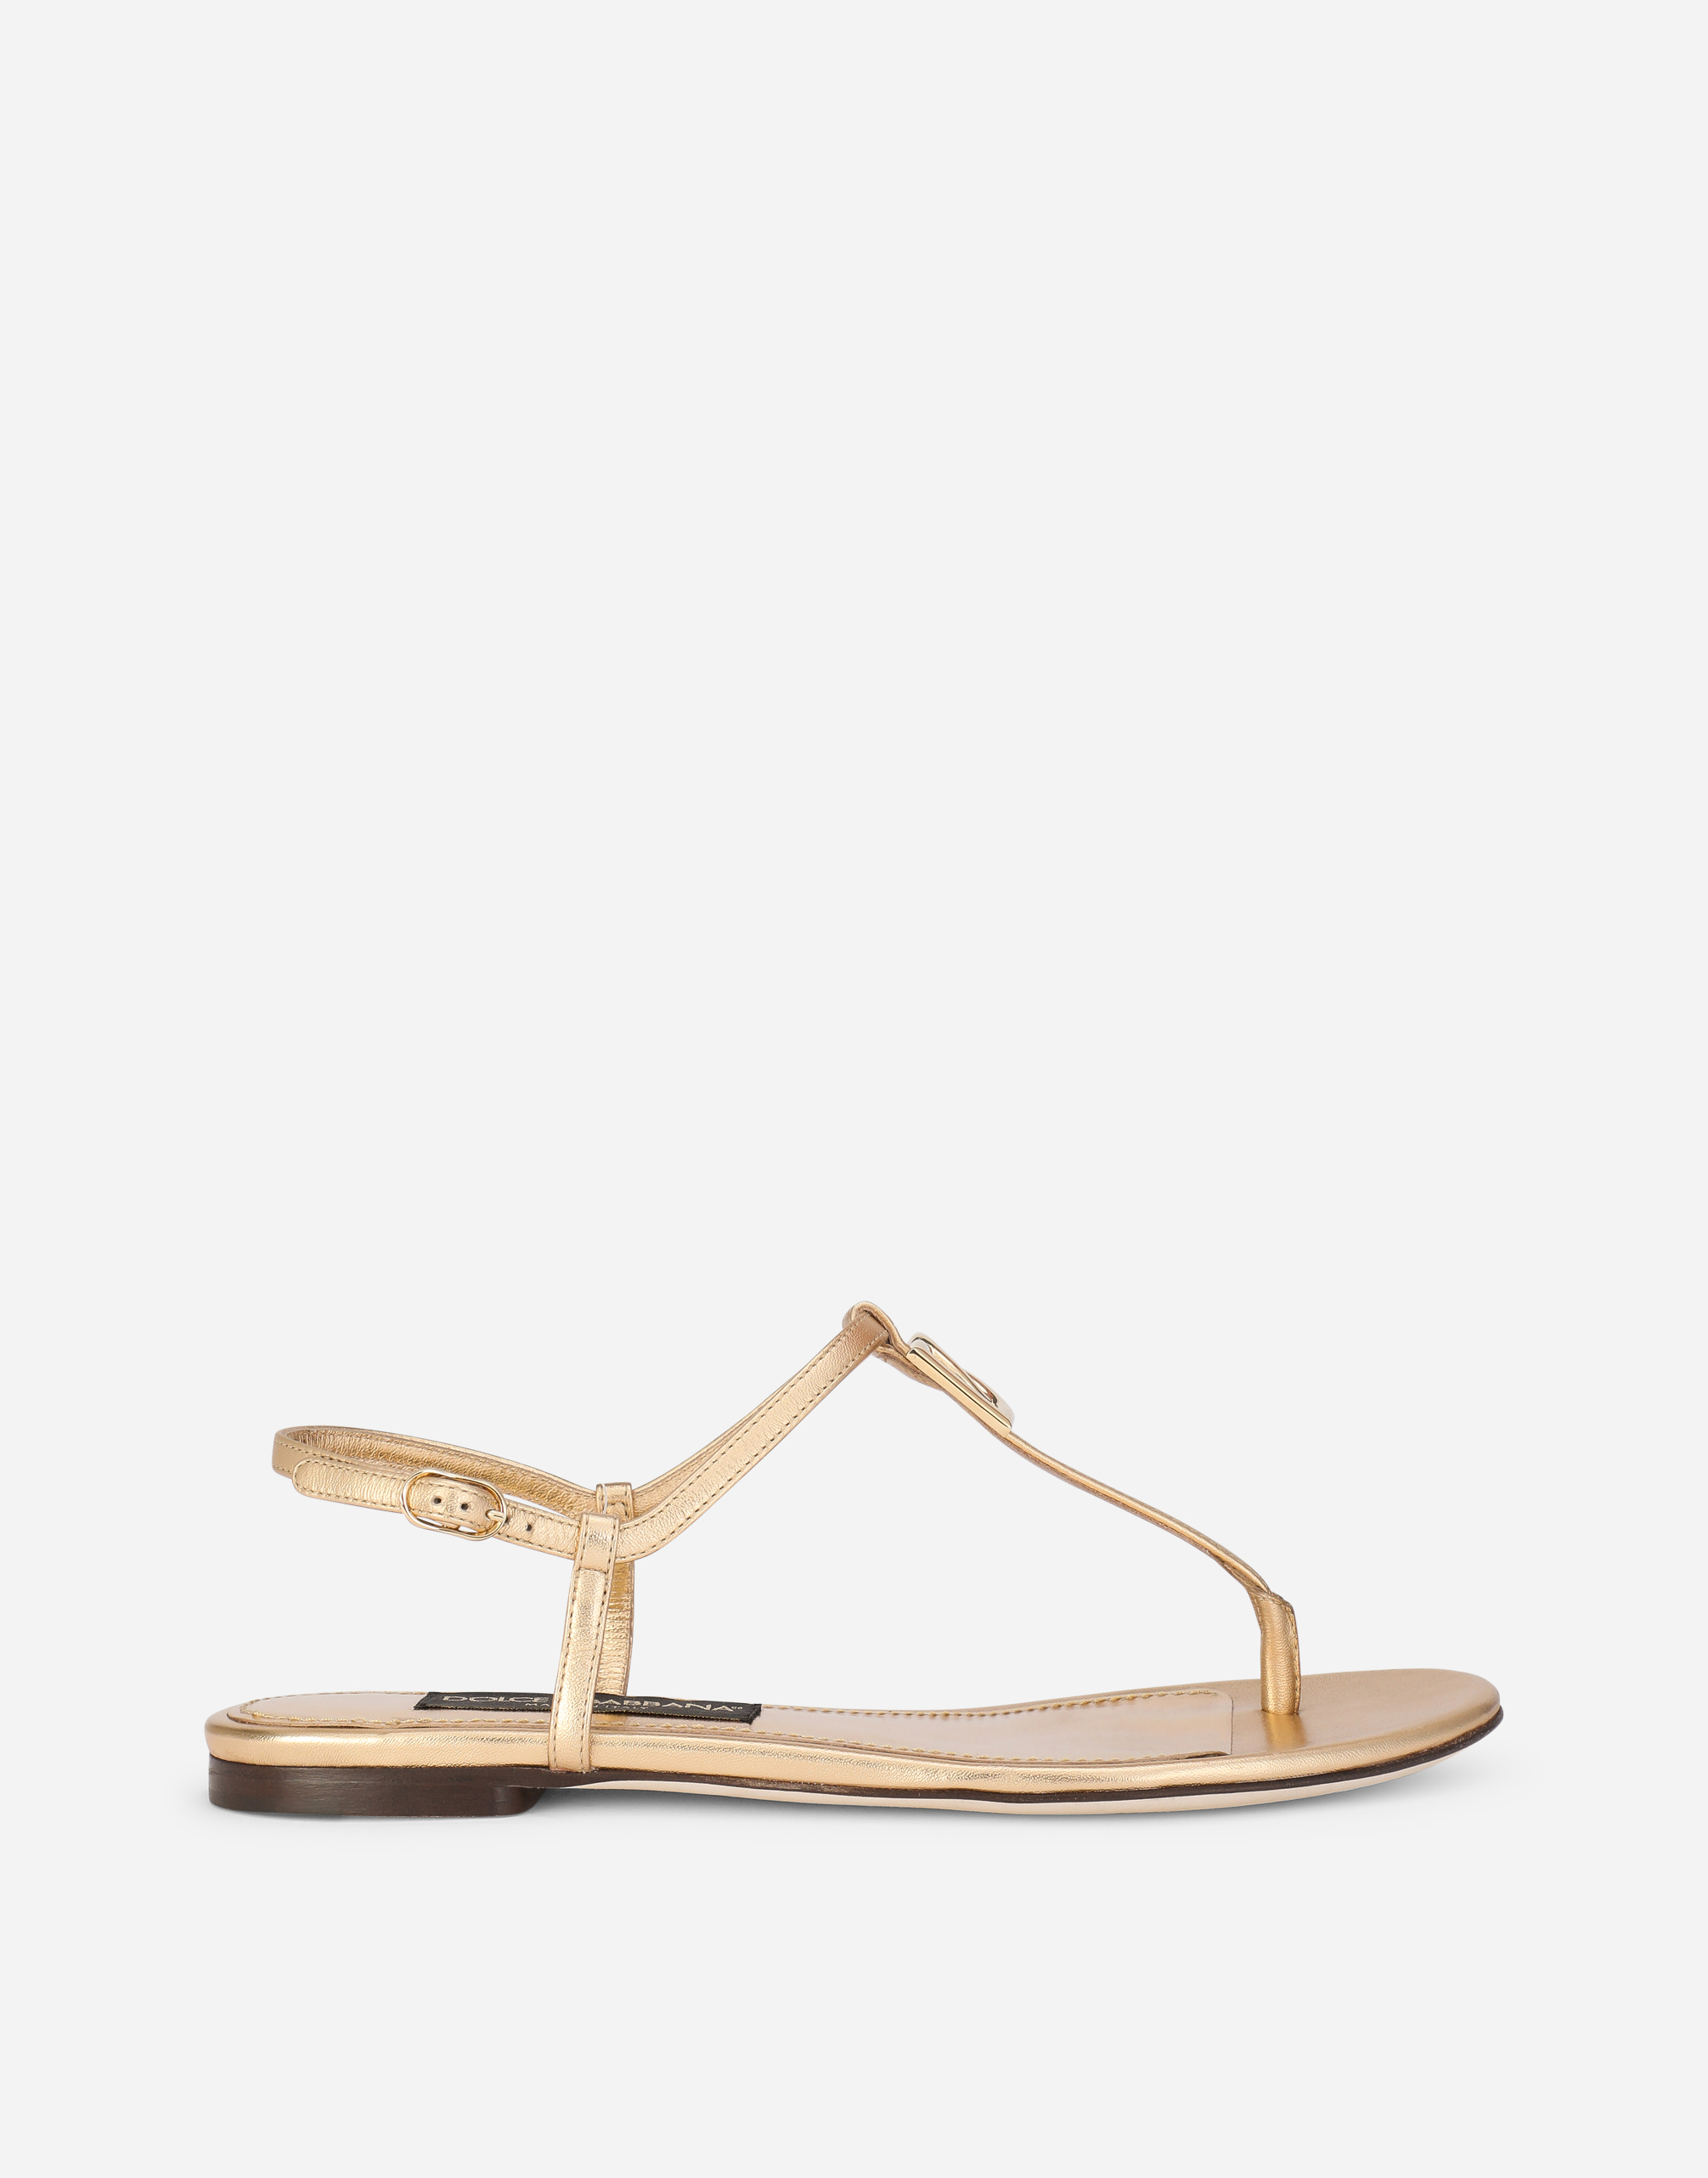 Nappa mordore DG thong sandals in Gold for Women | Dolce&Gabbana®